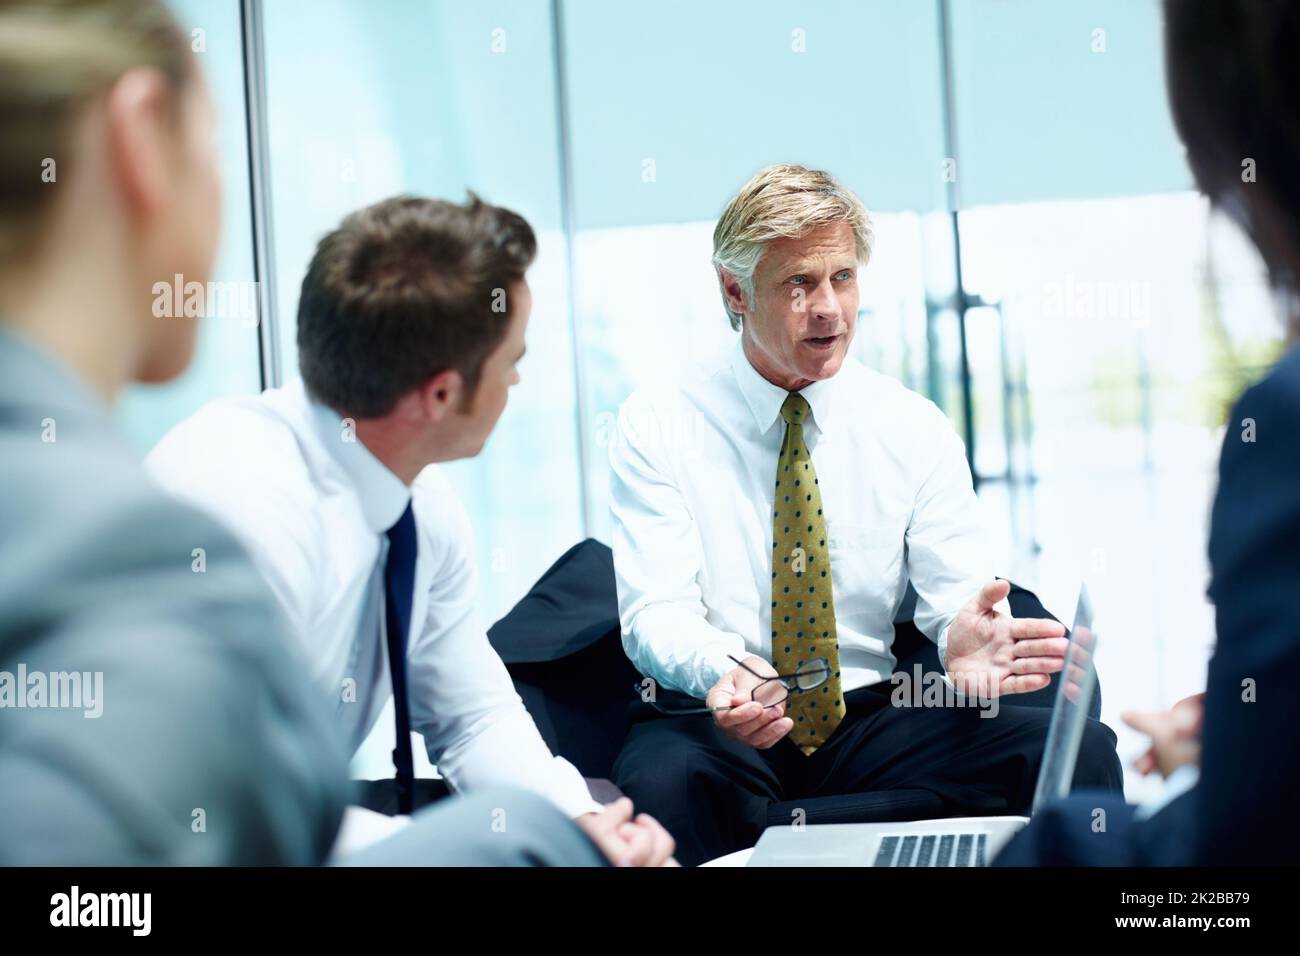 Business man conversing in meeting. Mature business man conversing with his executives during meeting. Stock Photo